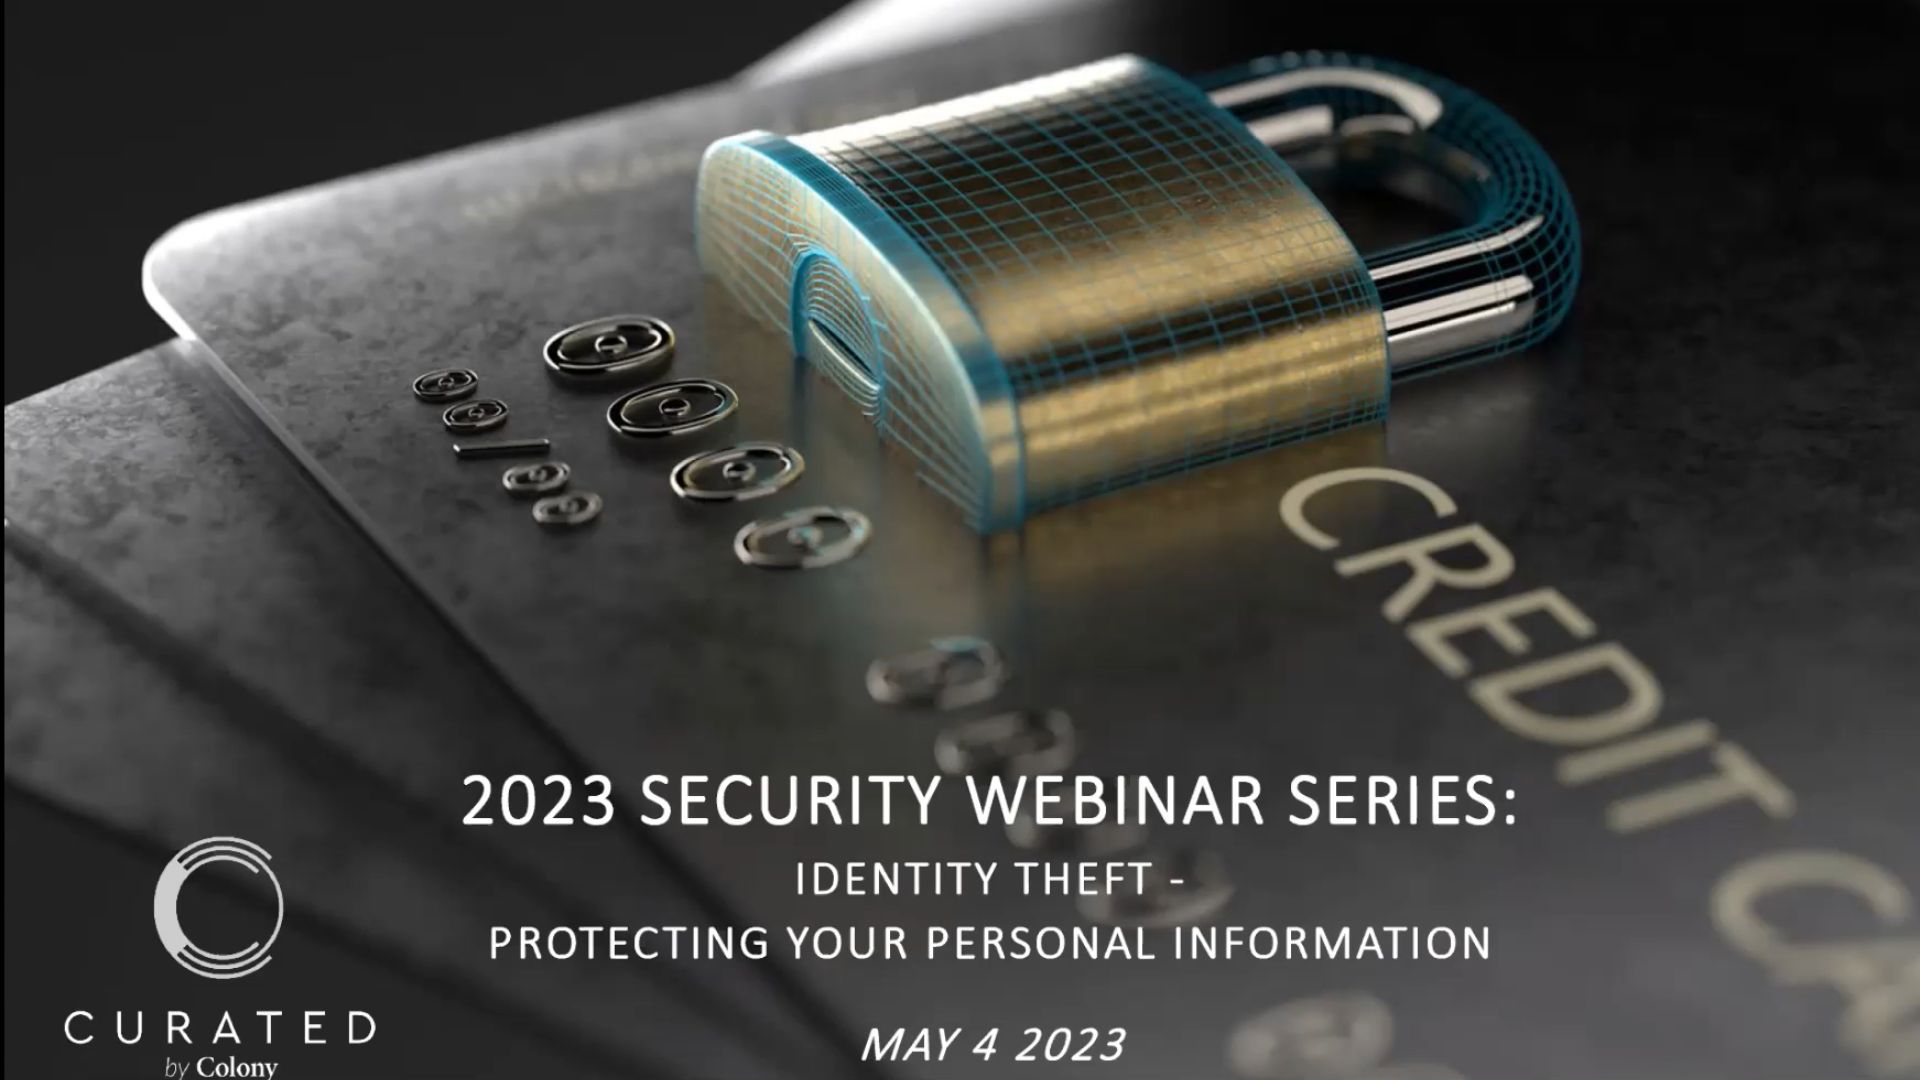 Curated by Colony - Identity Theft Webinar